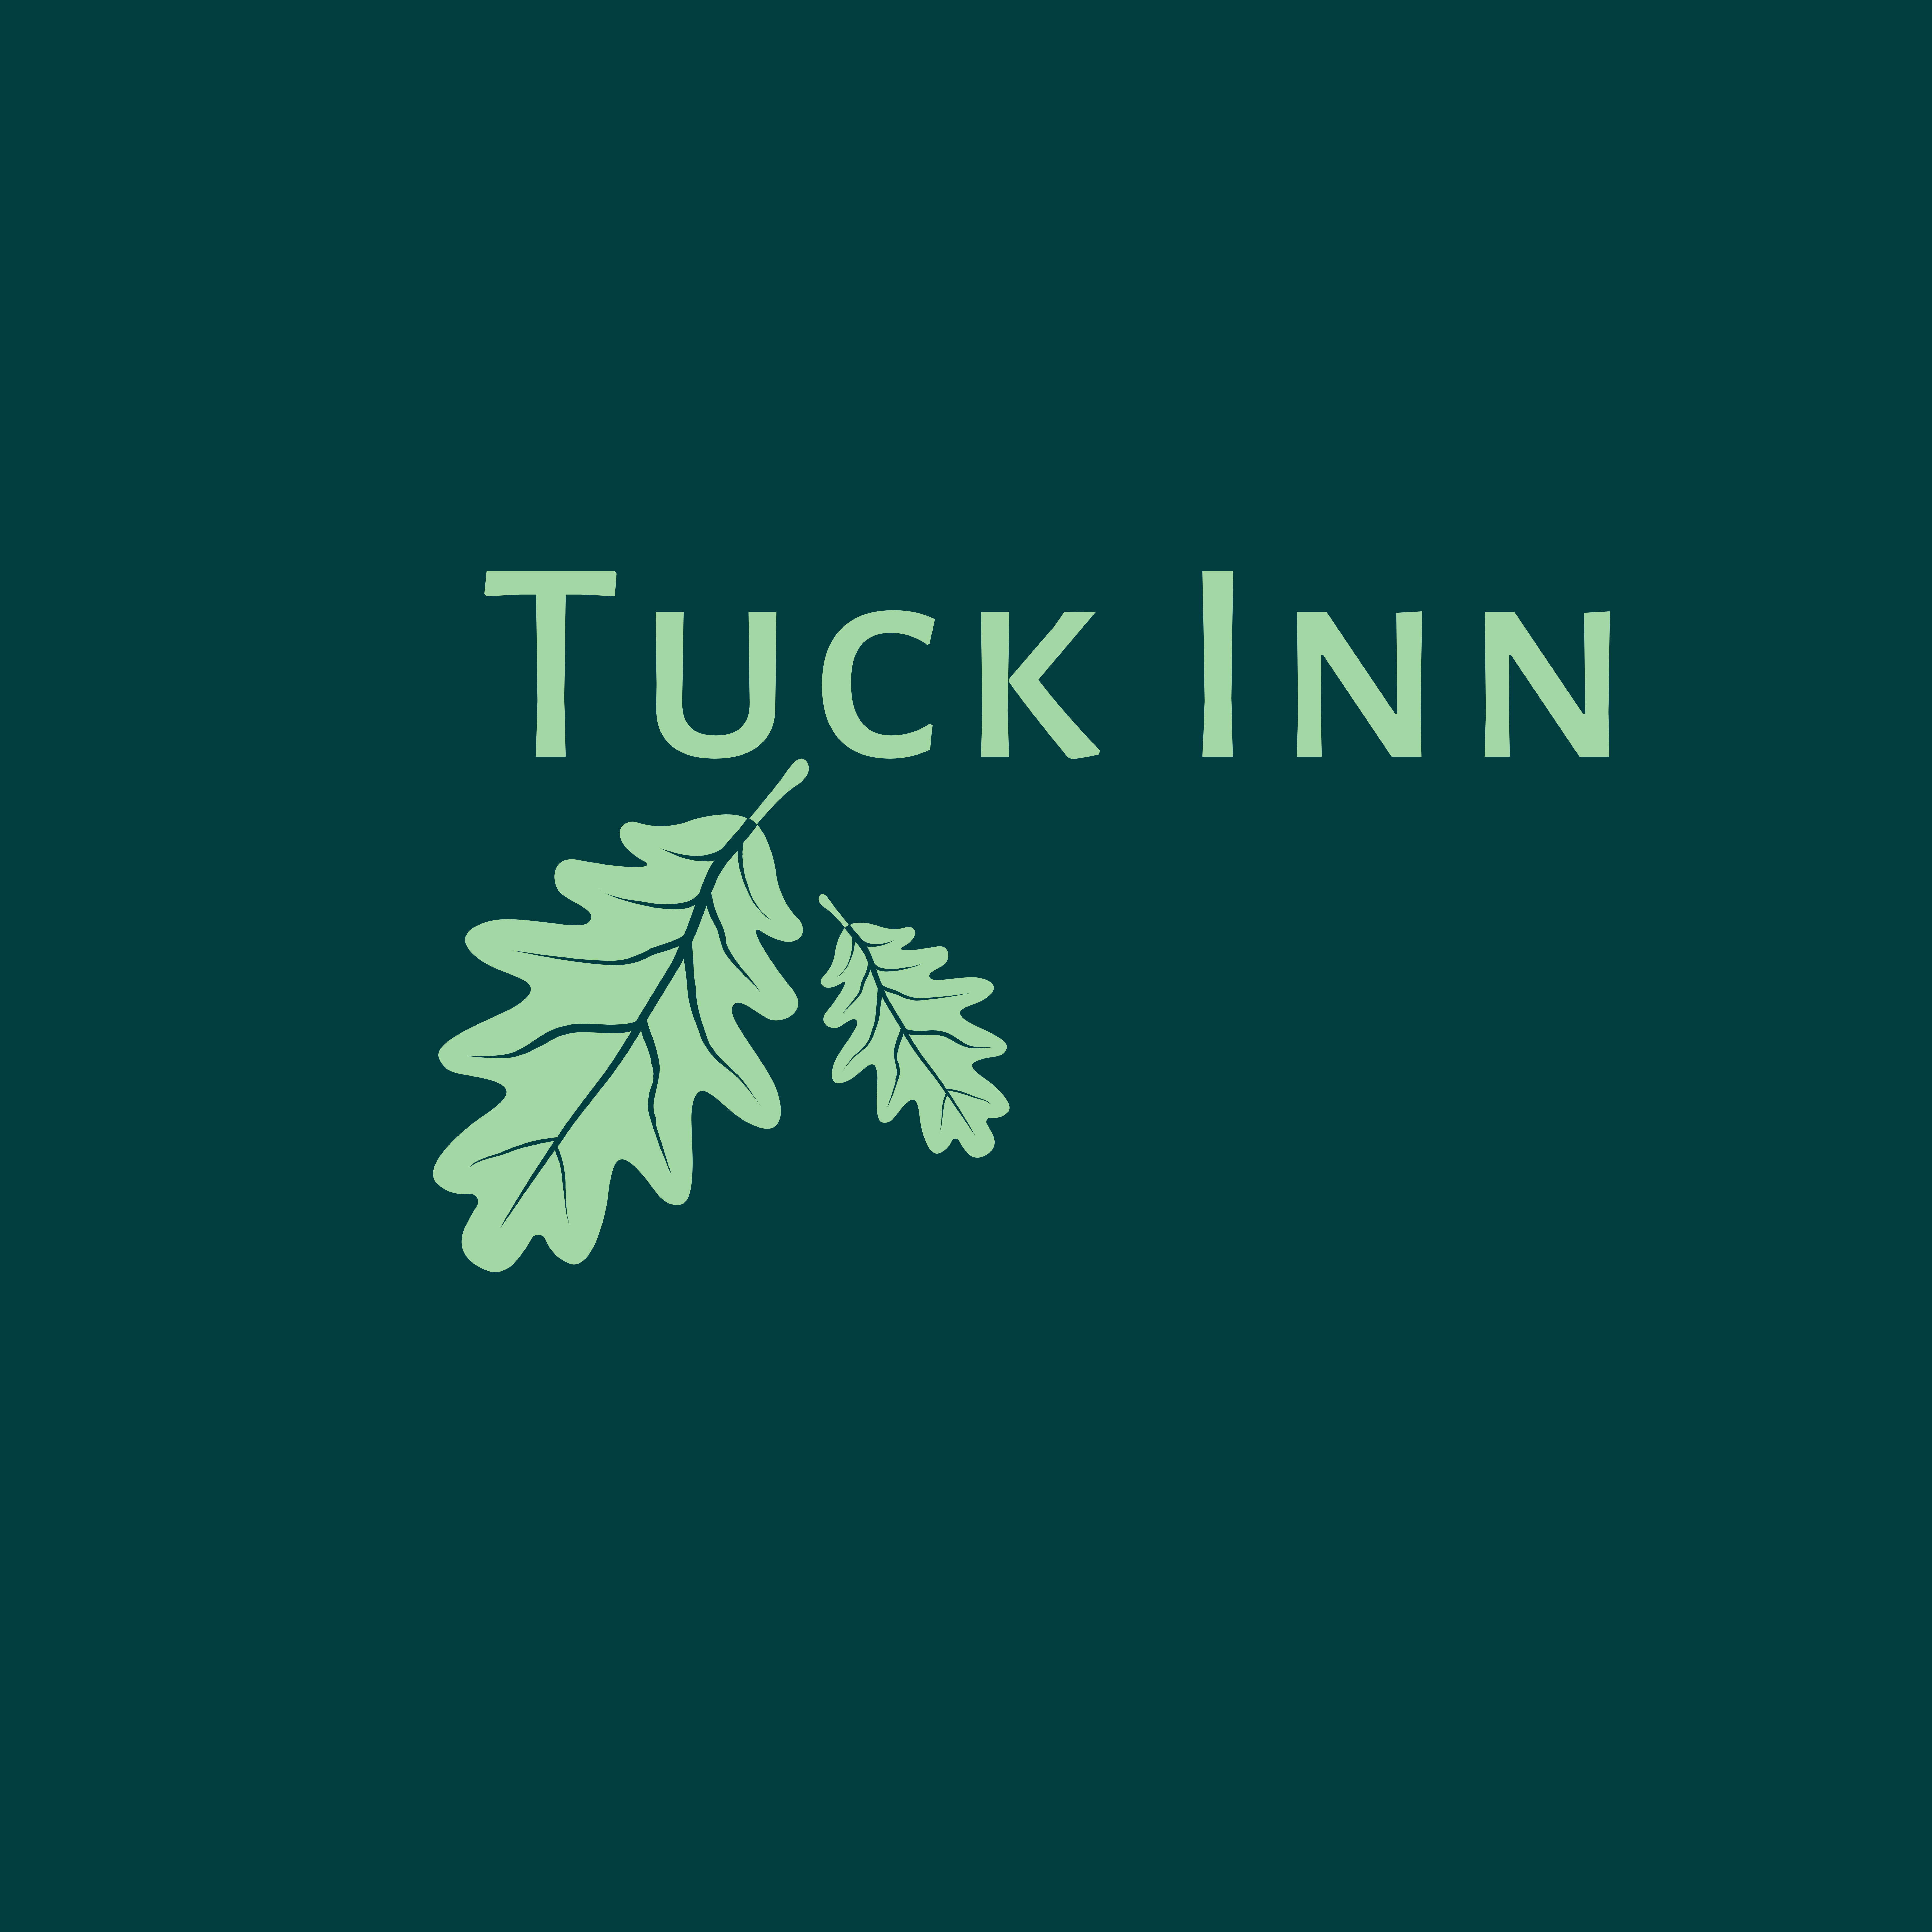 Tuck Inn Yarra Valley - In the (and welcome to) the land of the Wurundjeri people